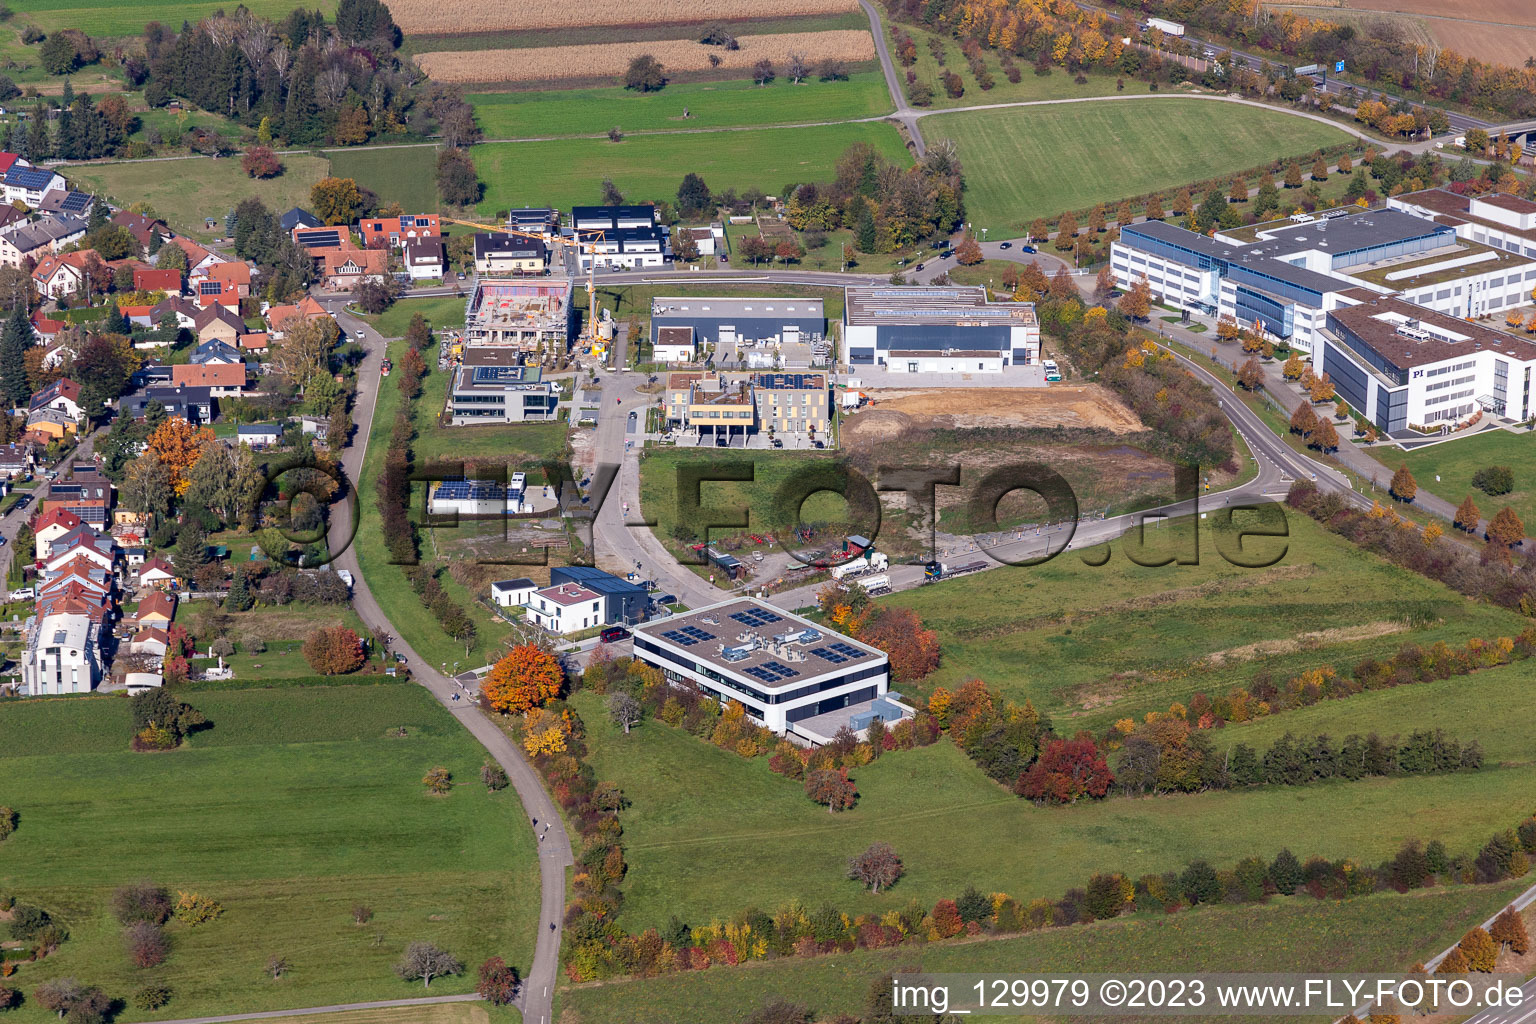 Physics Instruments (PI) GmbH & Co. KG in the district Palmbach in Karlsruhe in the state Baden-Wuerttemberg, Germany